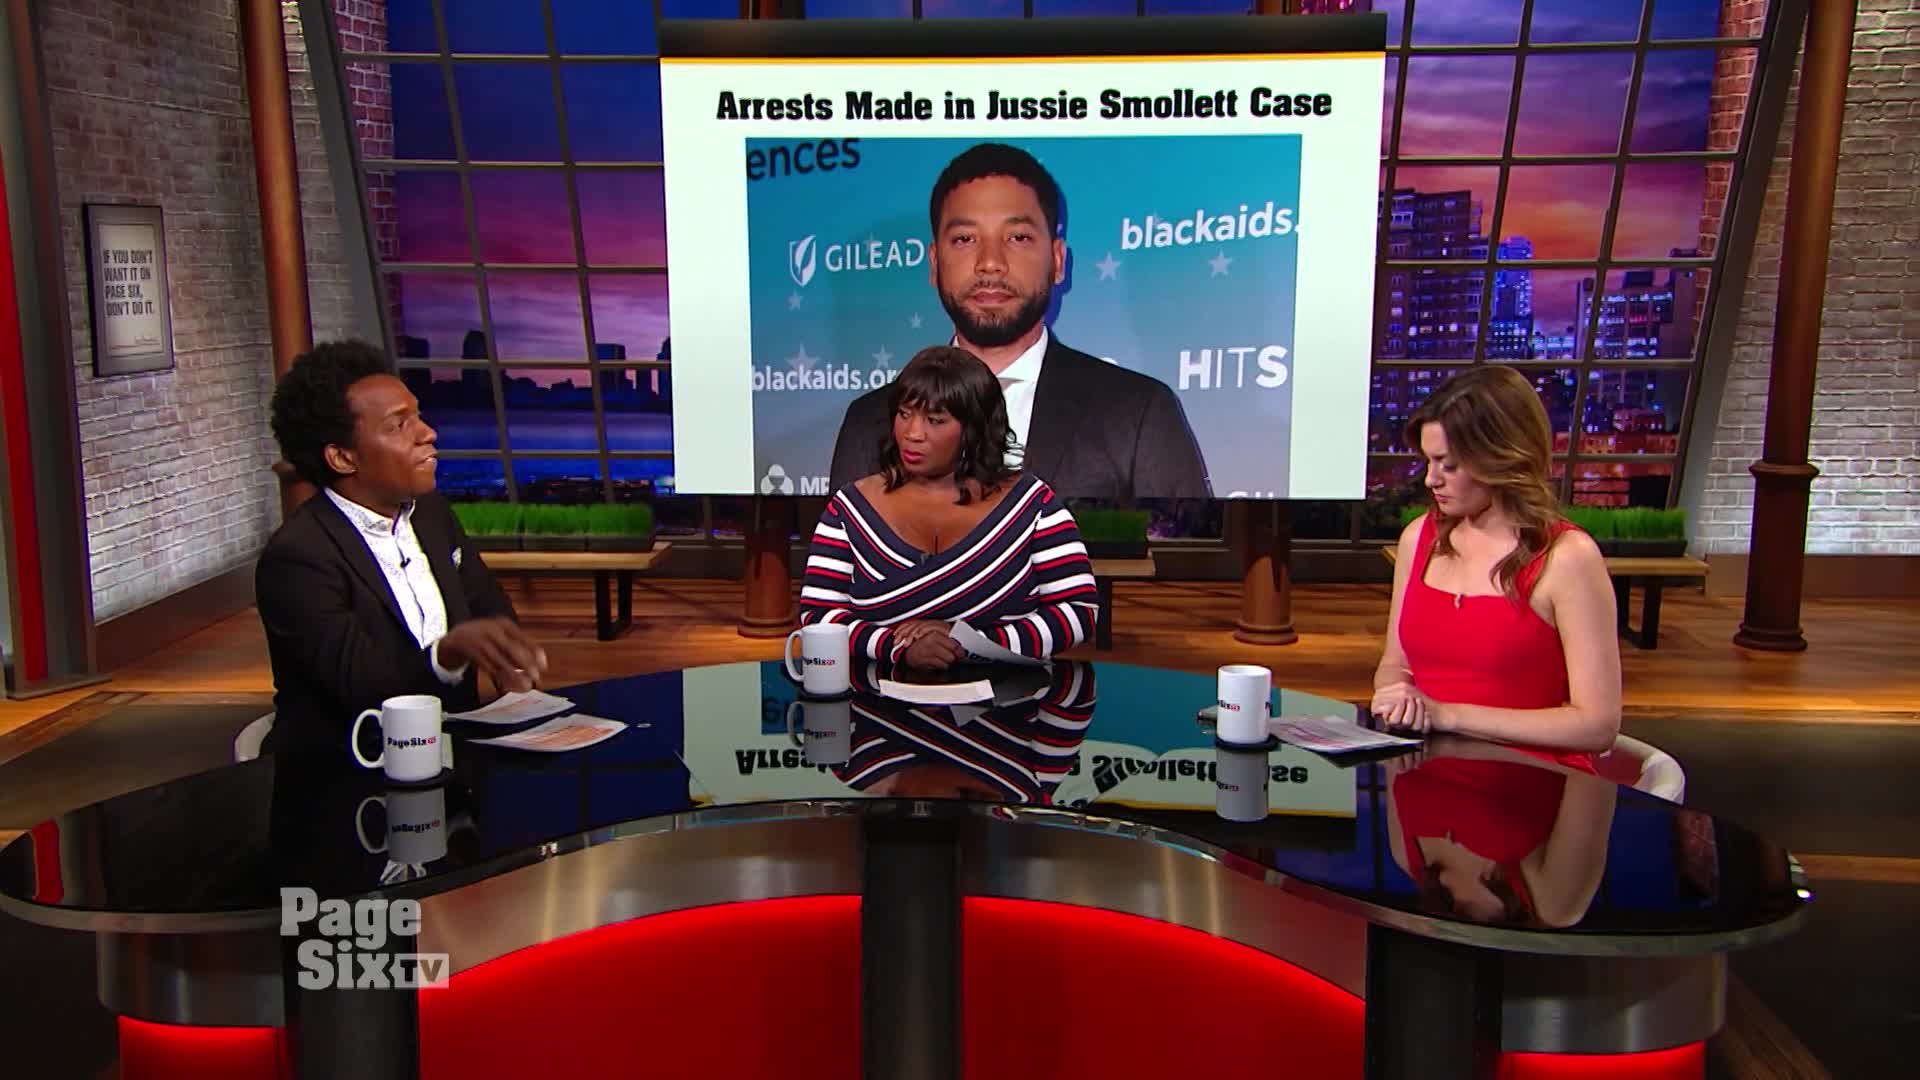 There is a new update in the @jussiesmollett case. Chicago police arrested two Nigerian brothers who were extras on #Empire. We have the full story on #PageSixTV.